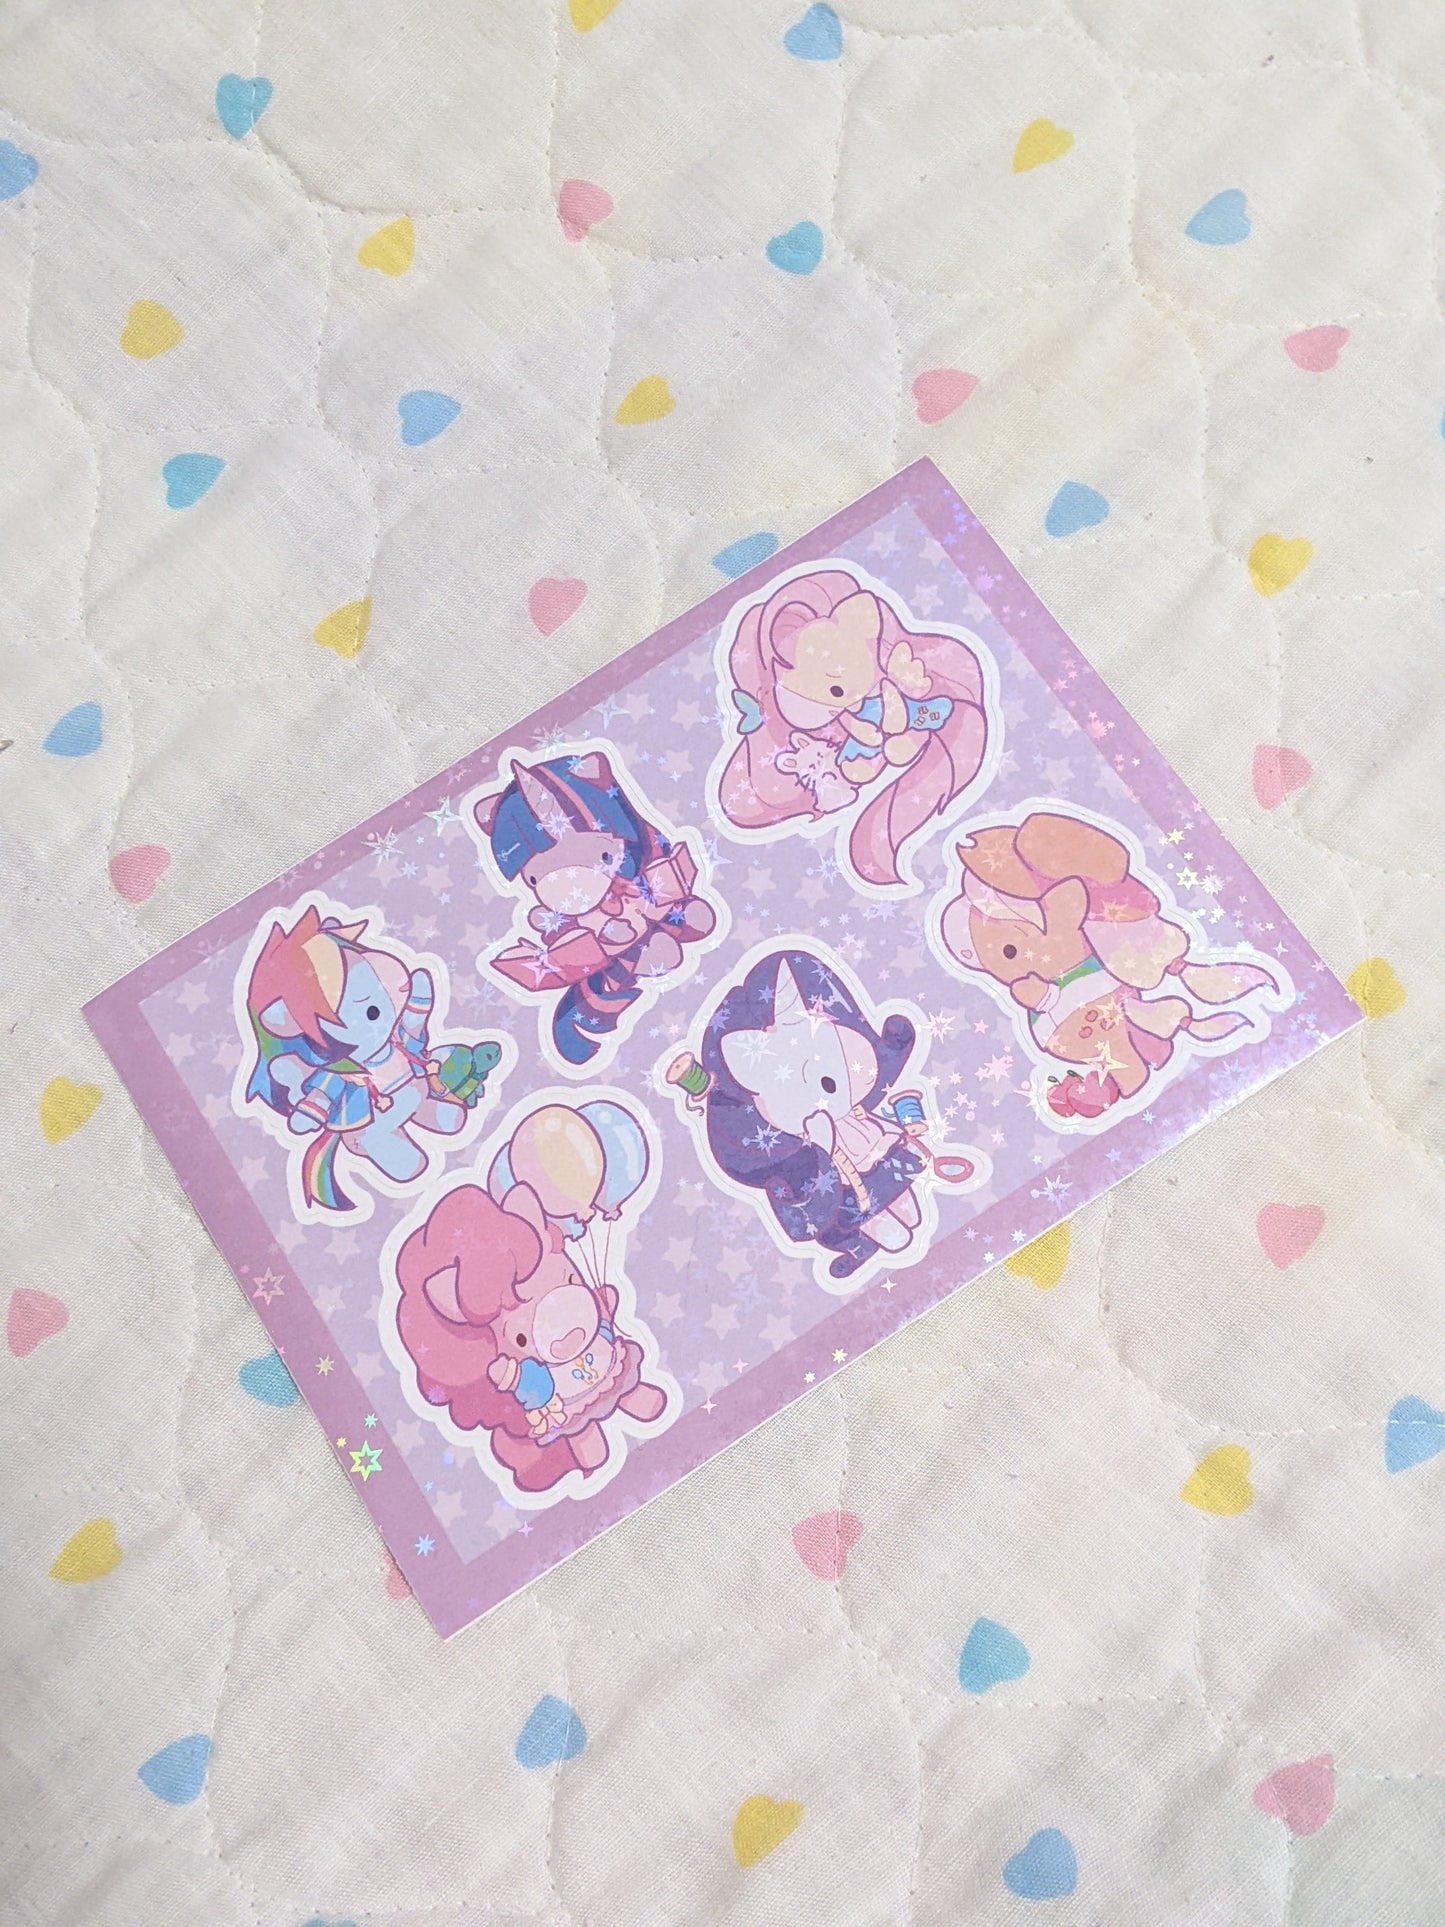 These horses are small sticker sheet